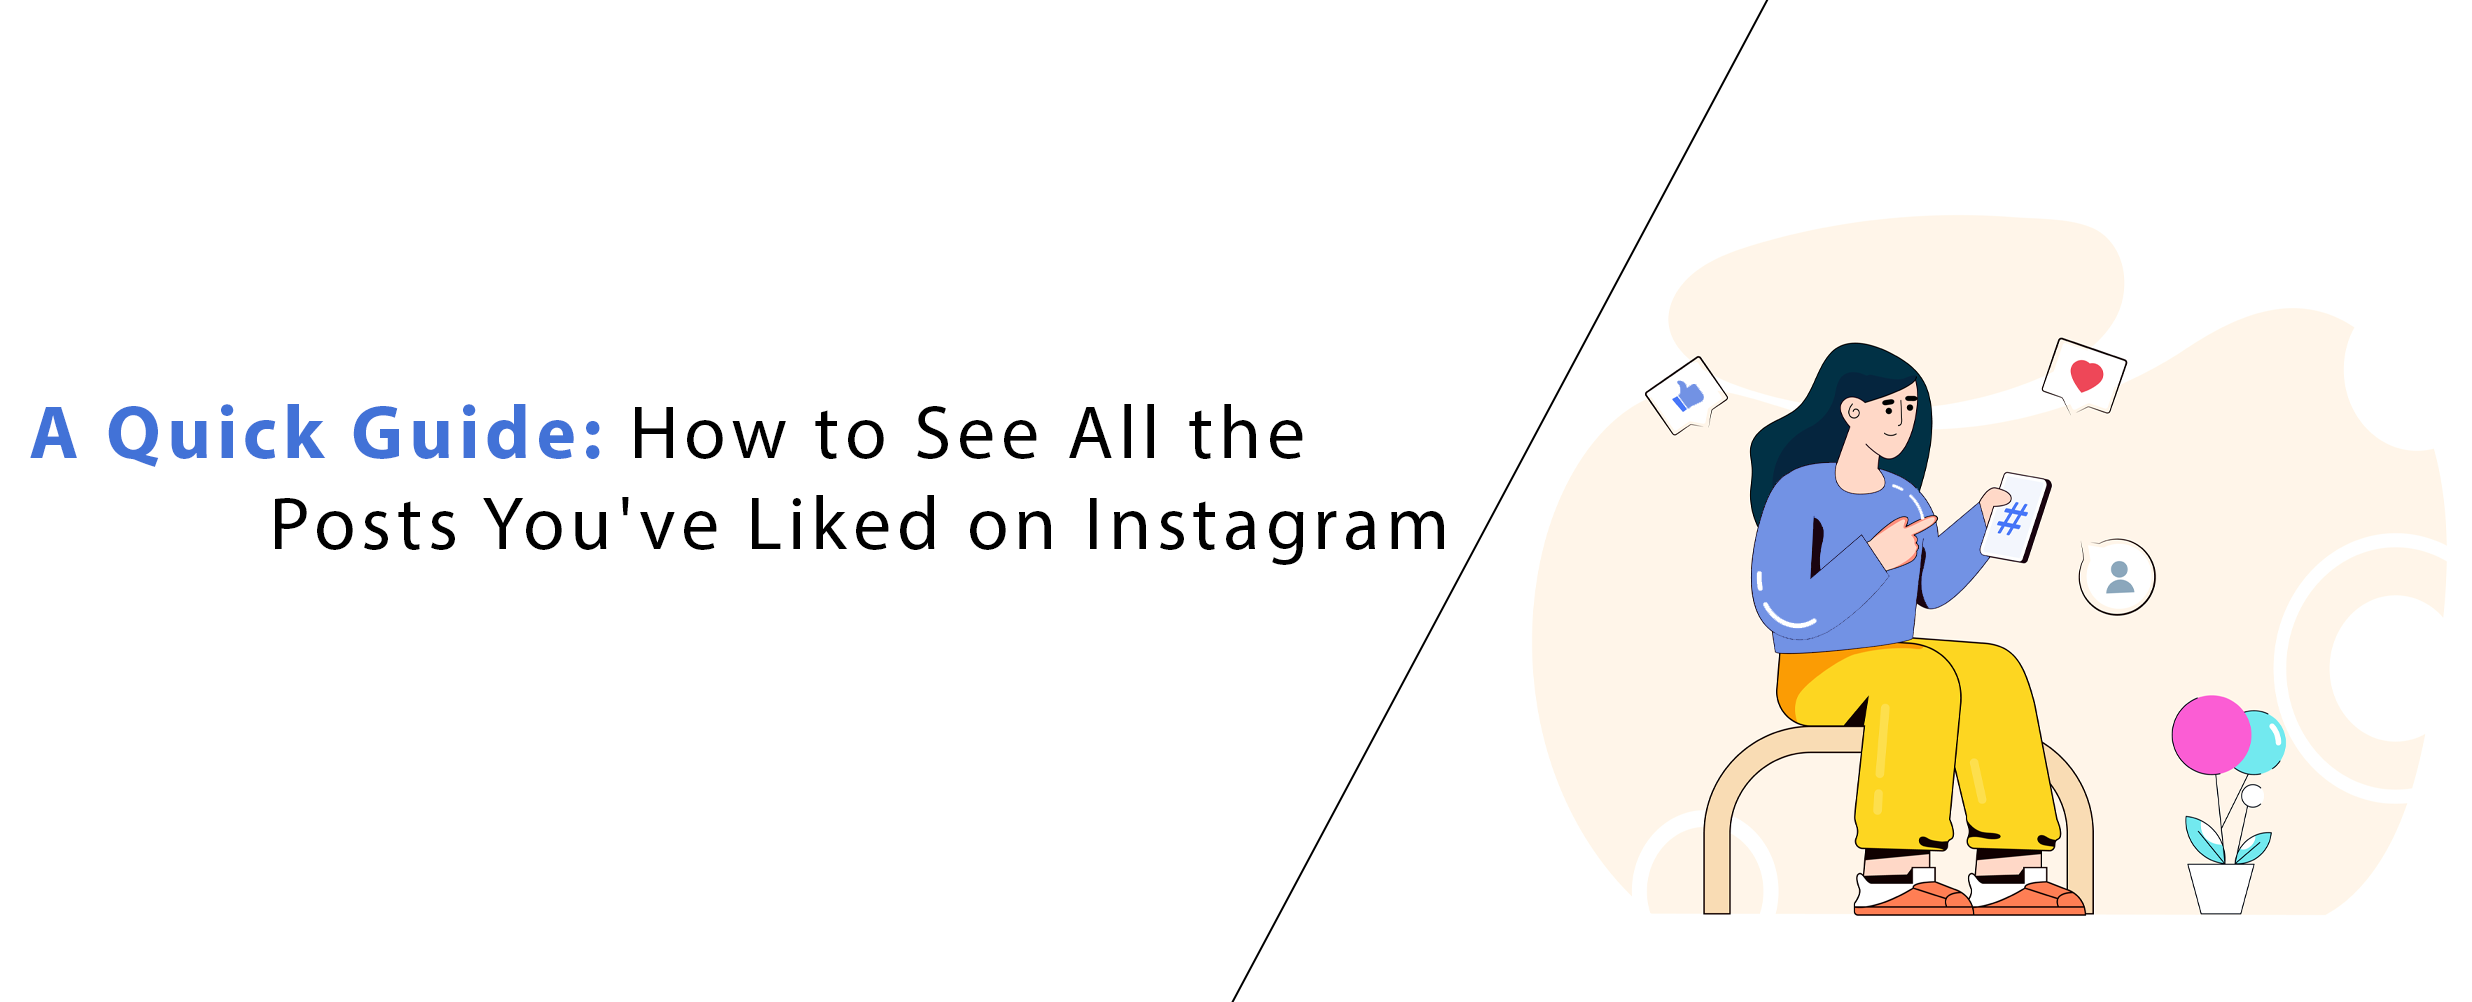 Quick Guide: How to See All the Posts You've Liked on Instagram